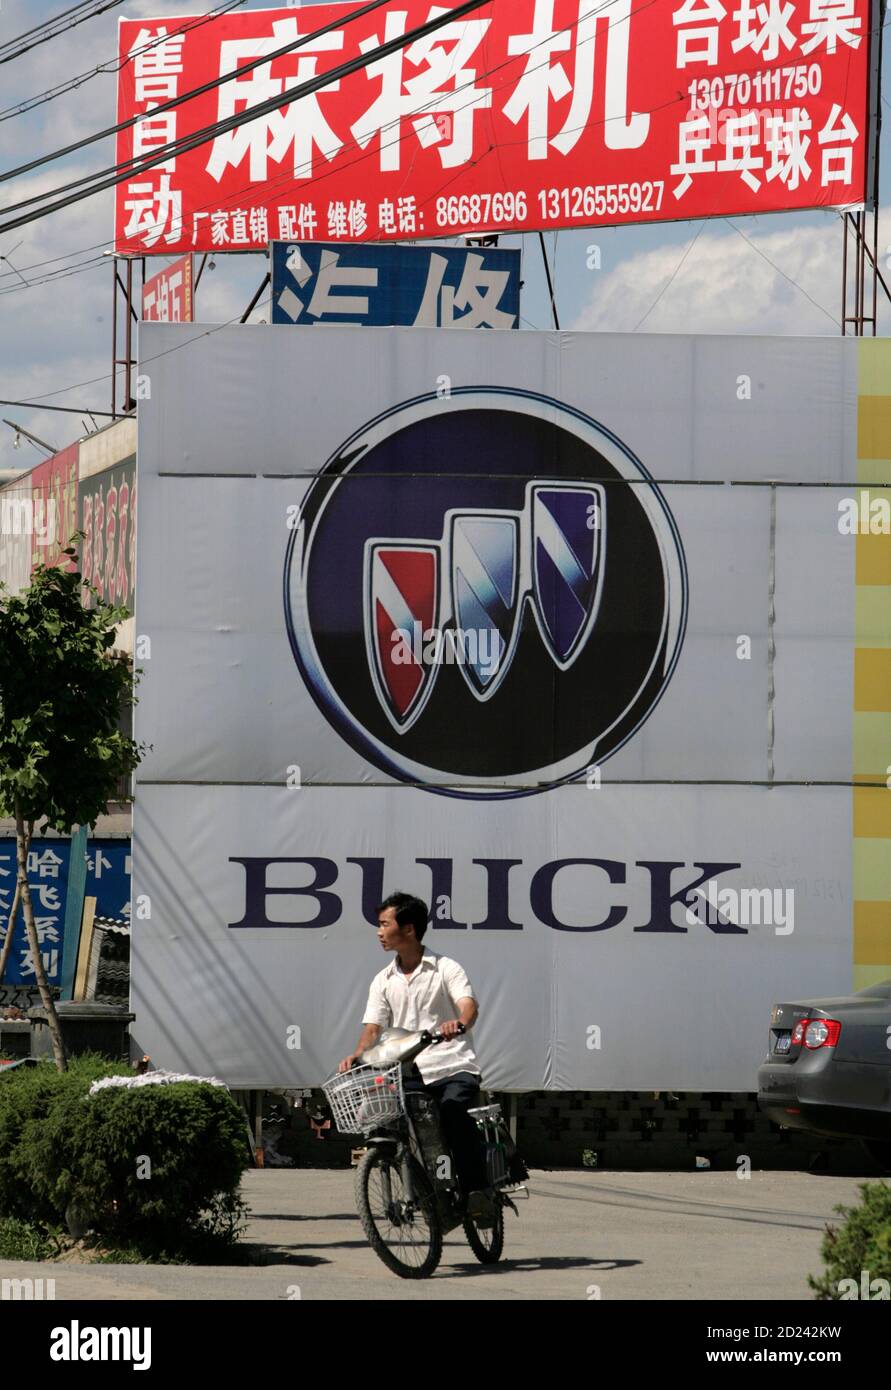 A man rides a motorized bicycle in front of a Buick poster outside a General Motors (GM) auto dealership in Beijing May 29, 2009. GM is facing imminent bankruptcy in the United States after bondholders rejected a debt-for-equity swap, a key part of the restructuring plan it needs to complete before a June 1 deadline imposed by the administration of President Barack Obama. Its China division, primarily two ventures with SAIC Motor, is profitable and self-sufficient, and able to fund its own daily operations and expansion, executives say. REUTERS/Christina Hu (CHINA TRANSPORT BUSINESS) Stock Photo